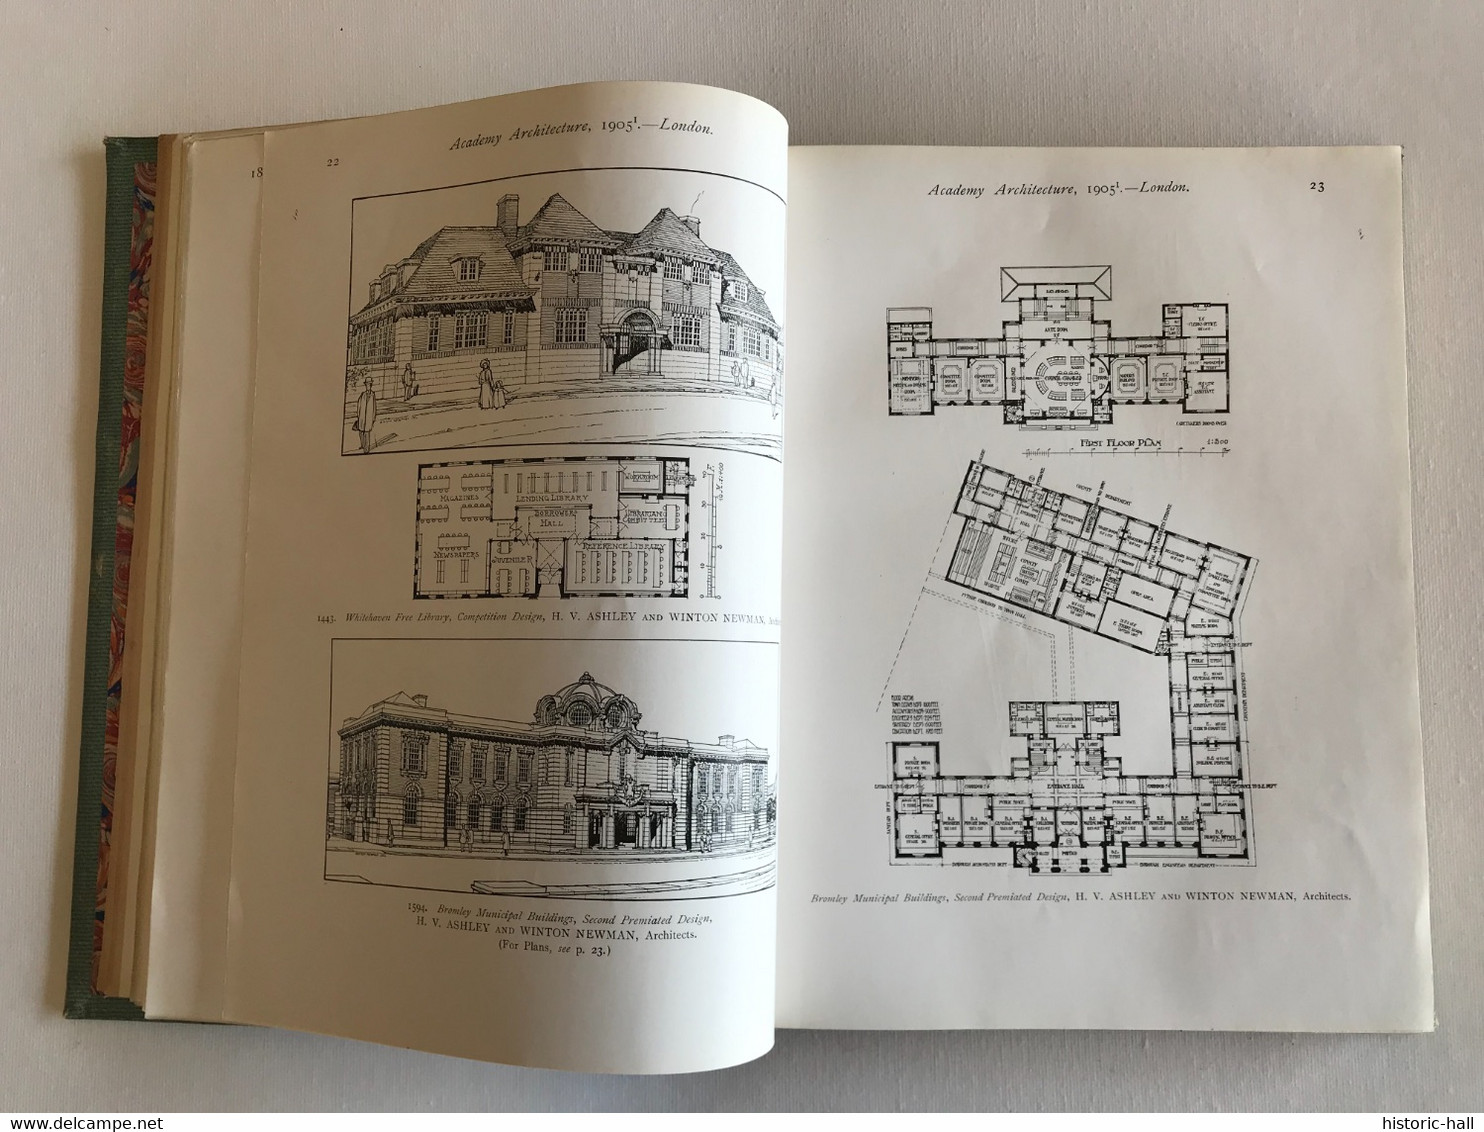 ACADEMY ARCHITECTURE & Architectural Review - vol 27 & 28 - 1905 - Alexander KOCH